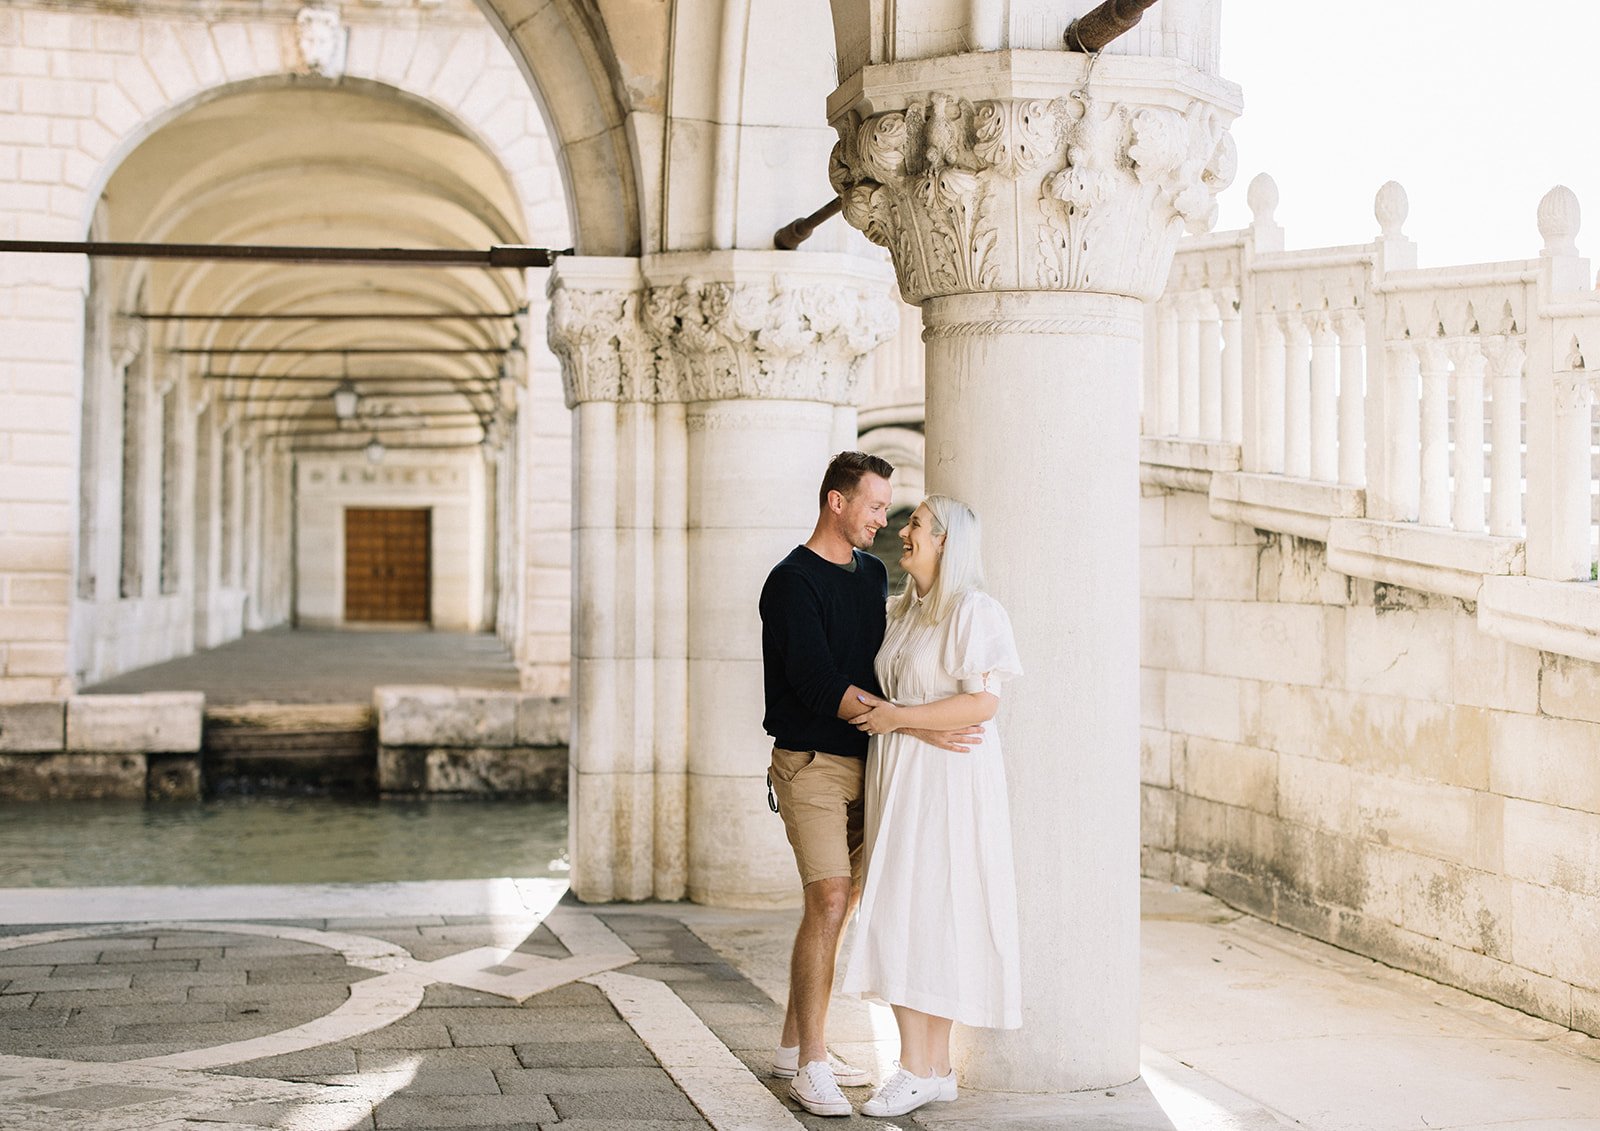 An engagement session photographed near the bridge of sigh Venice Italy